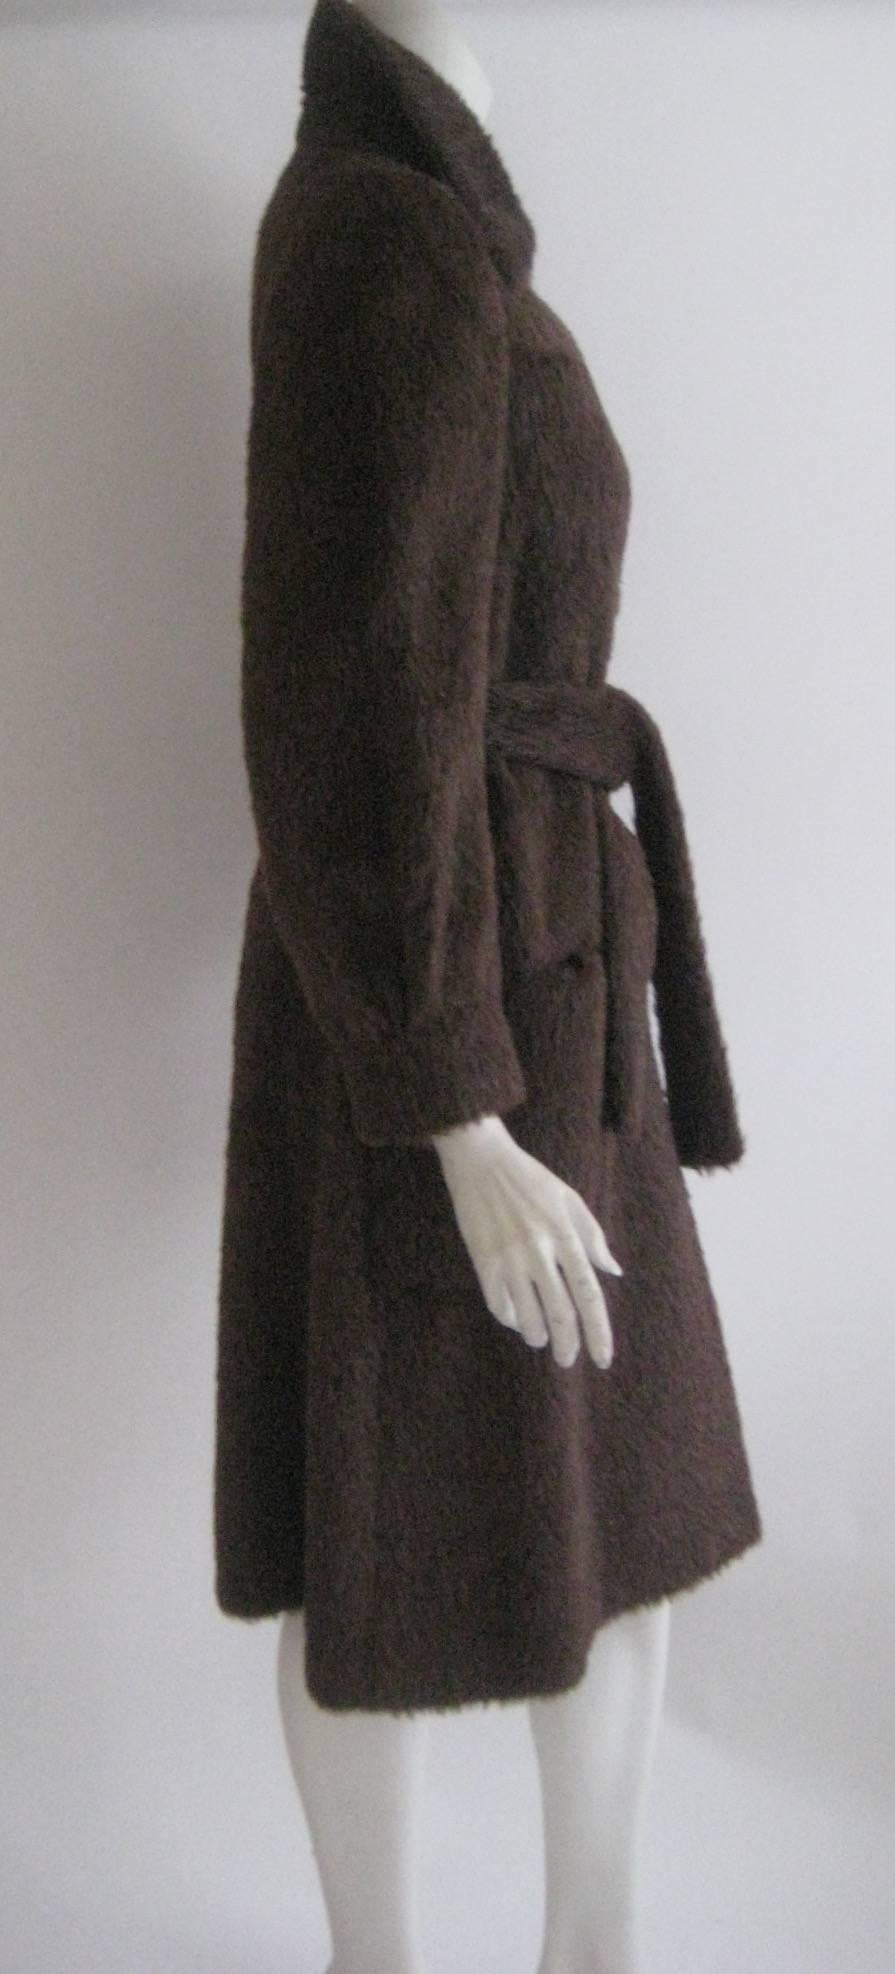 Lovely Norell Mohair wrap coat 
4 small front patch pockets
Matching sash belt
Button down front
Lined in brown silk